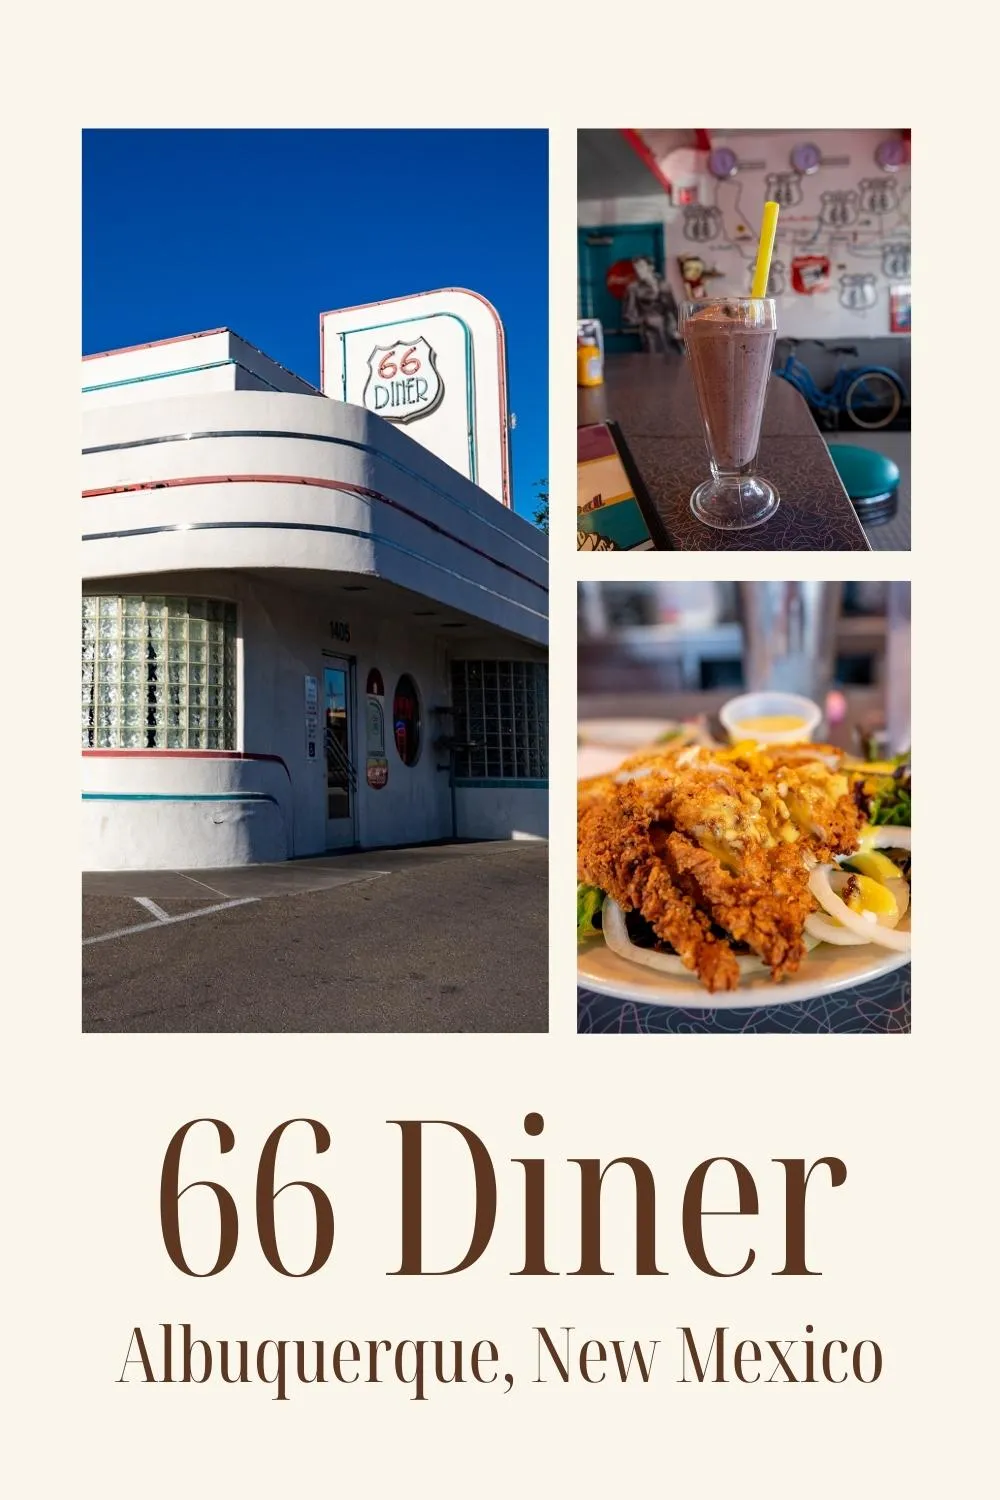 Craving that classic diner experience while road tripping Route 66? This Albuquerque restaurant has it all: vintage design, neon lights, memorabilia, photos ops, an exemplary menu, and some of the best milkshakes on The Mother Road. Pull over for for lunch or dinner and step into the 1950s at 66 Diner in Albuquerque, New Mexico. Visit this classic diner on your ROute 66 road trip through New Mexico. It is a must for your travel itinerary! #Route66 #Route66RoadTrip #NewMexico #NewMexicoRoadTrip